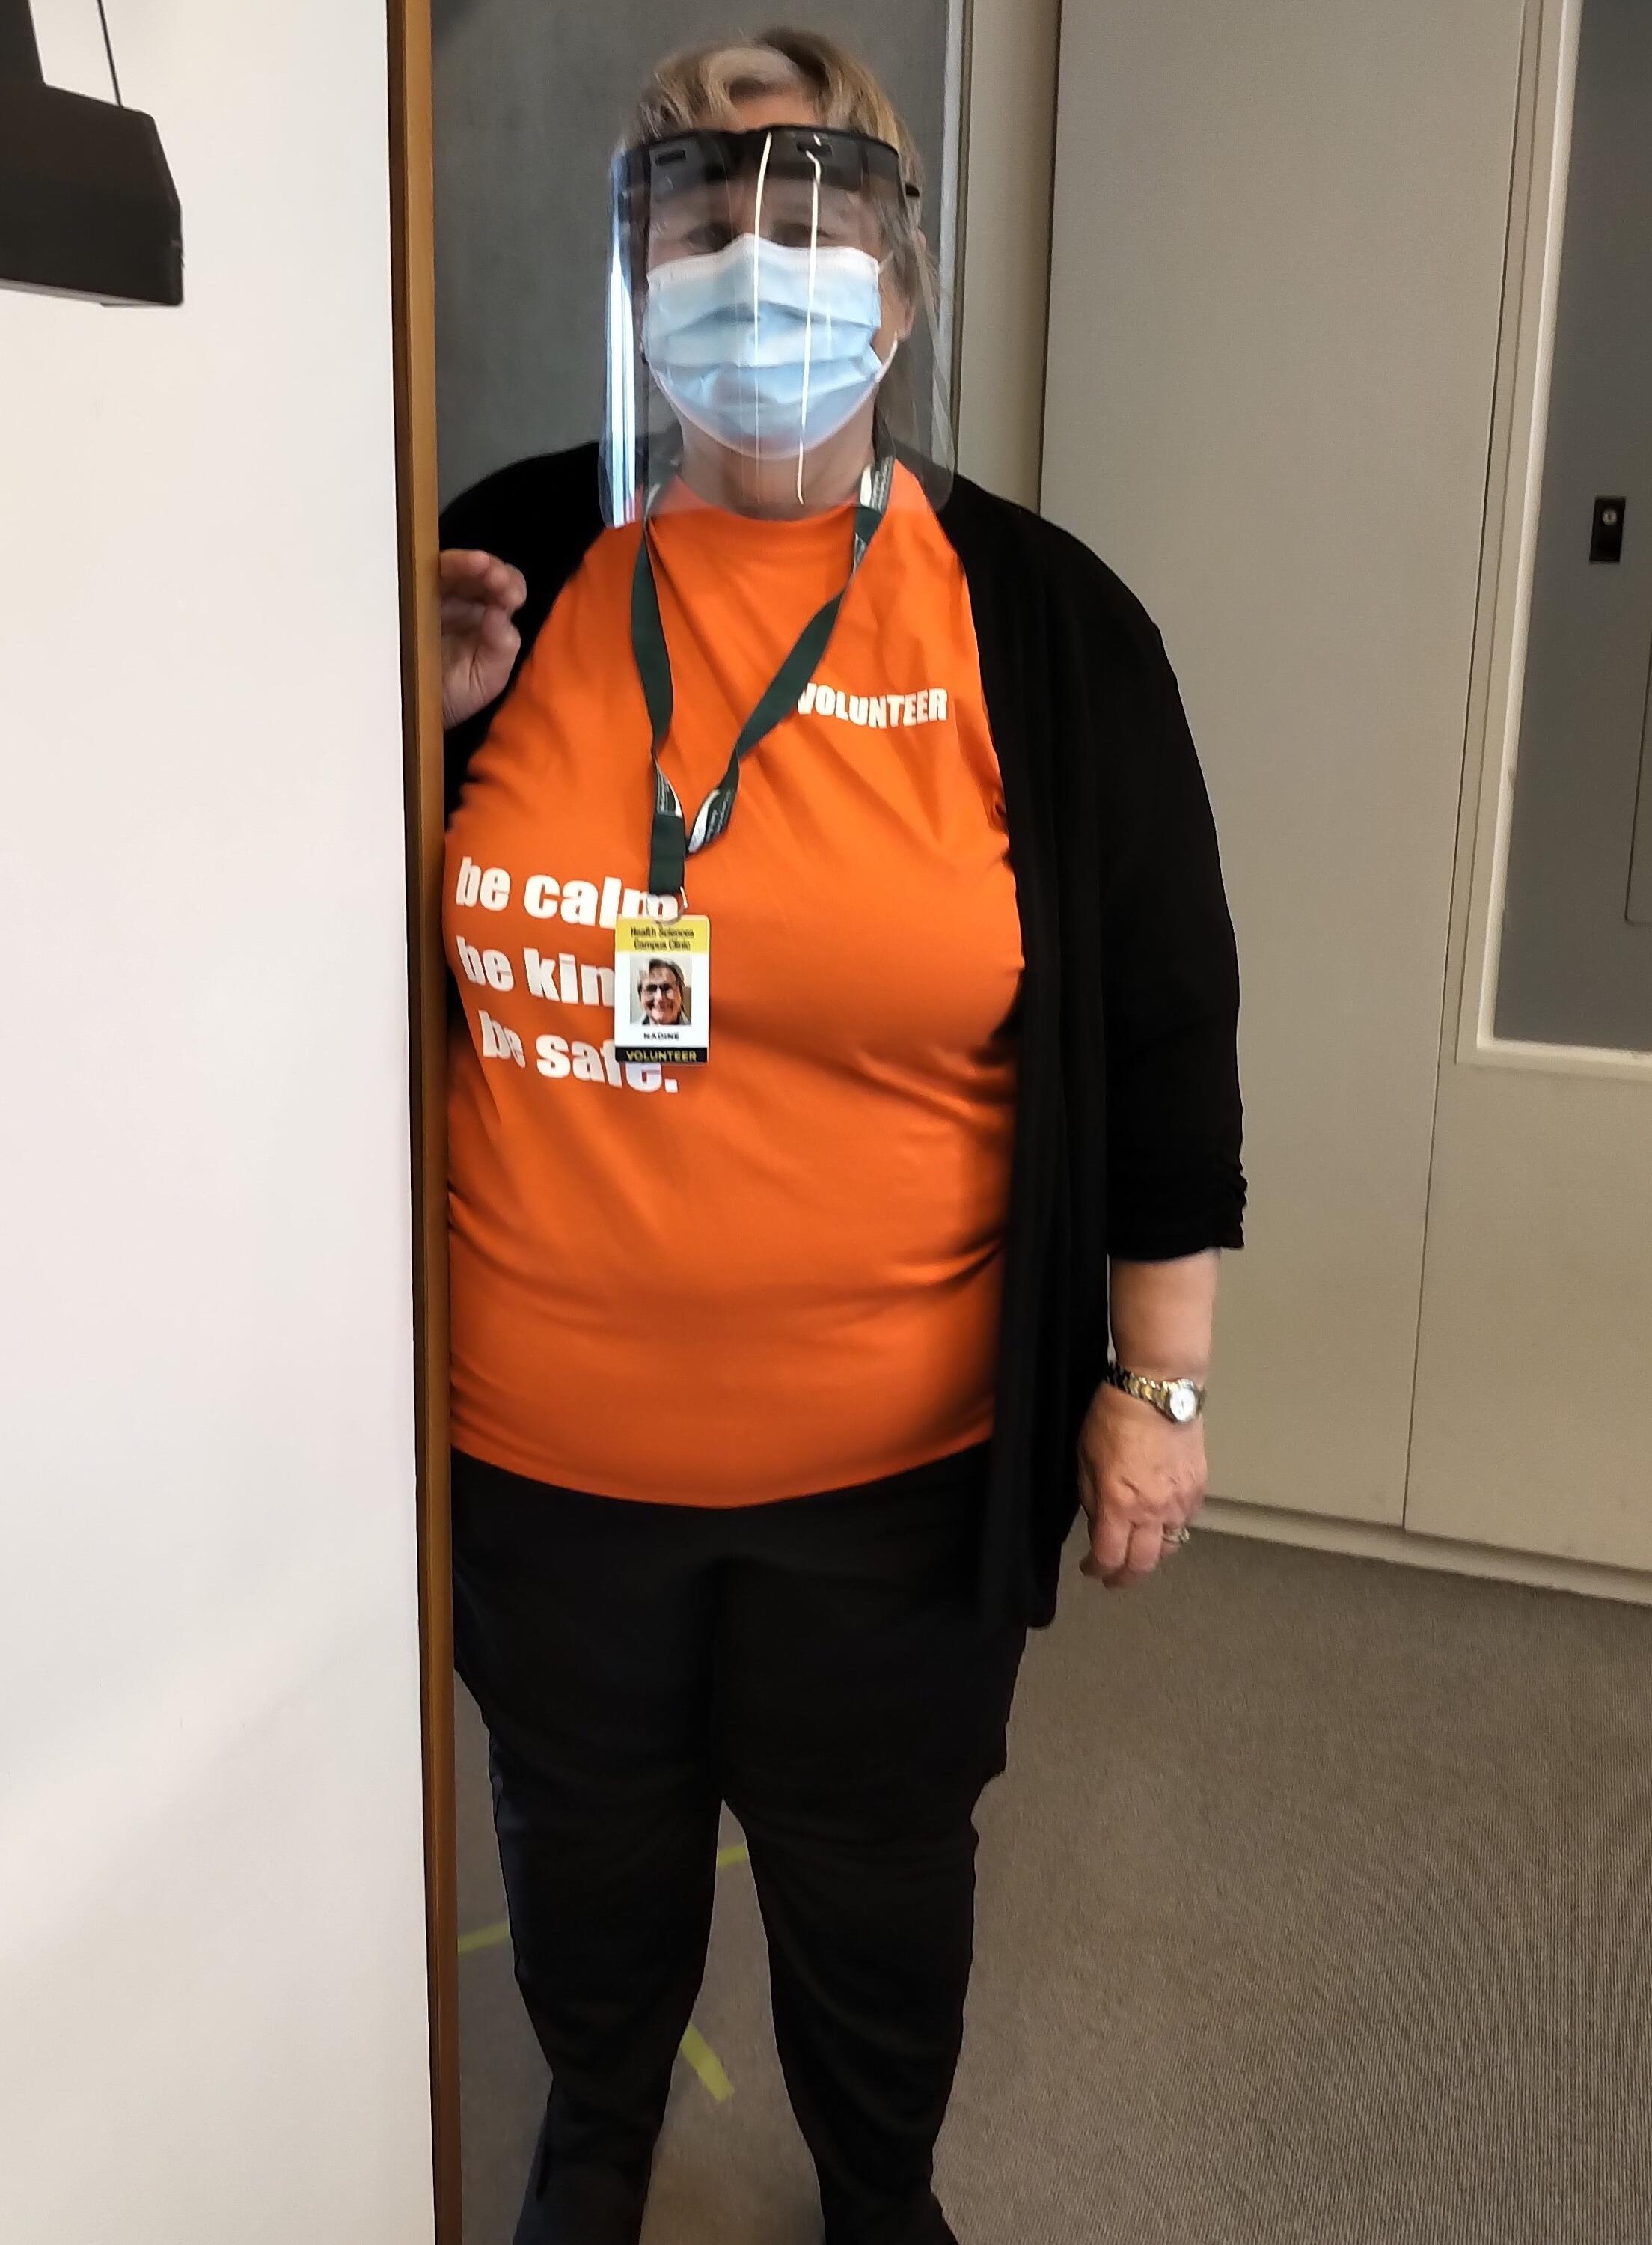 Nadine wearing clinic volunteer shirt and PPE mask